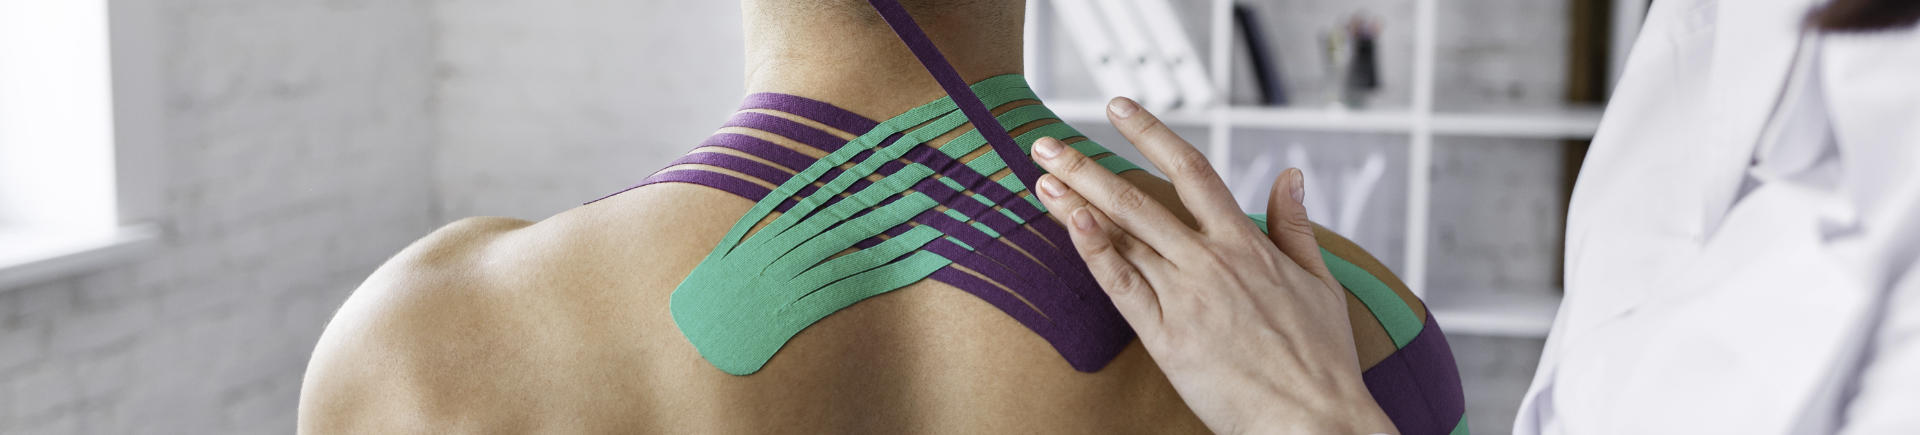 Rehab Specialist Applying Kinesiology Tape Over Patient's Neck and Shoulder